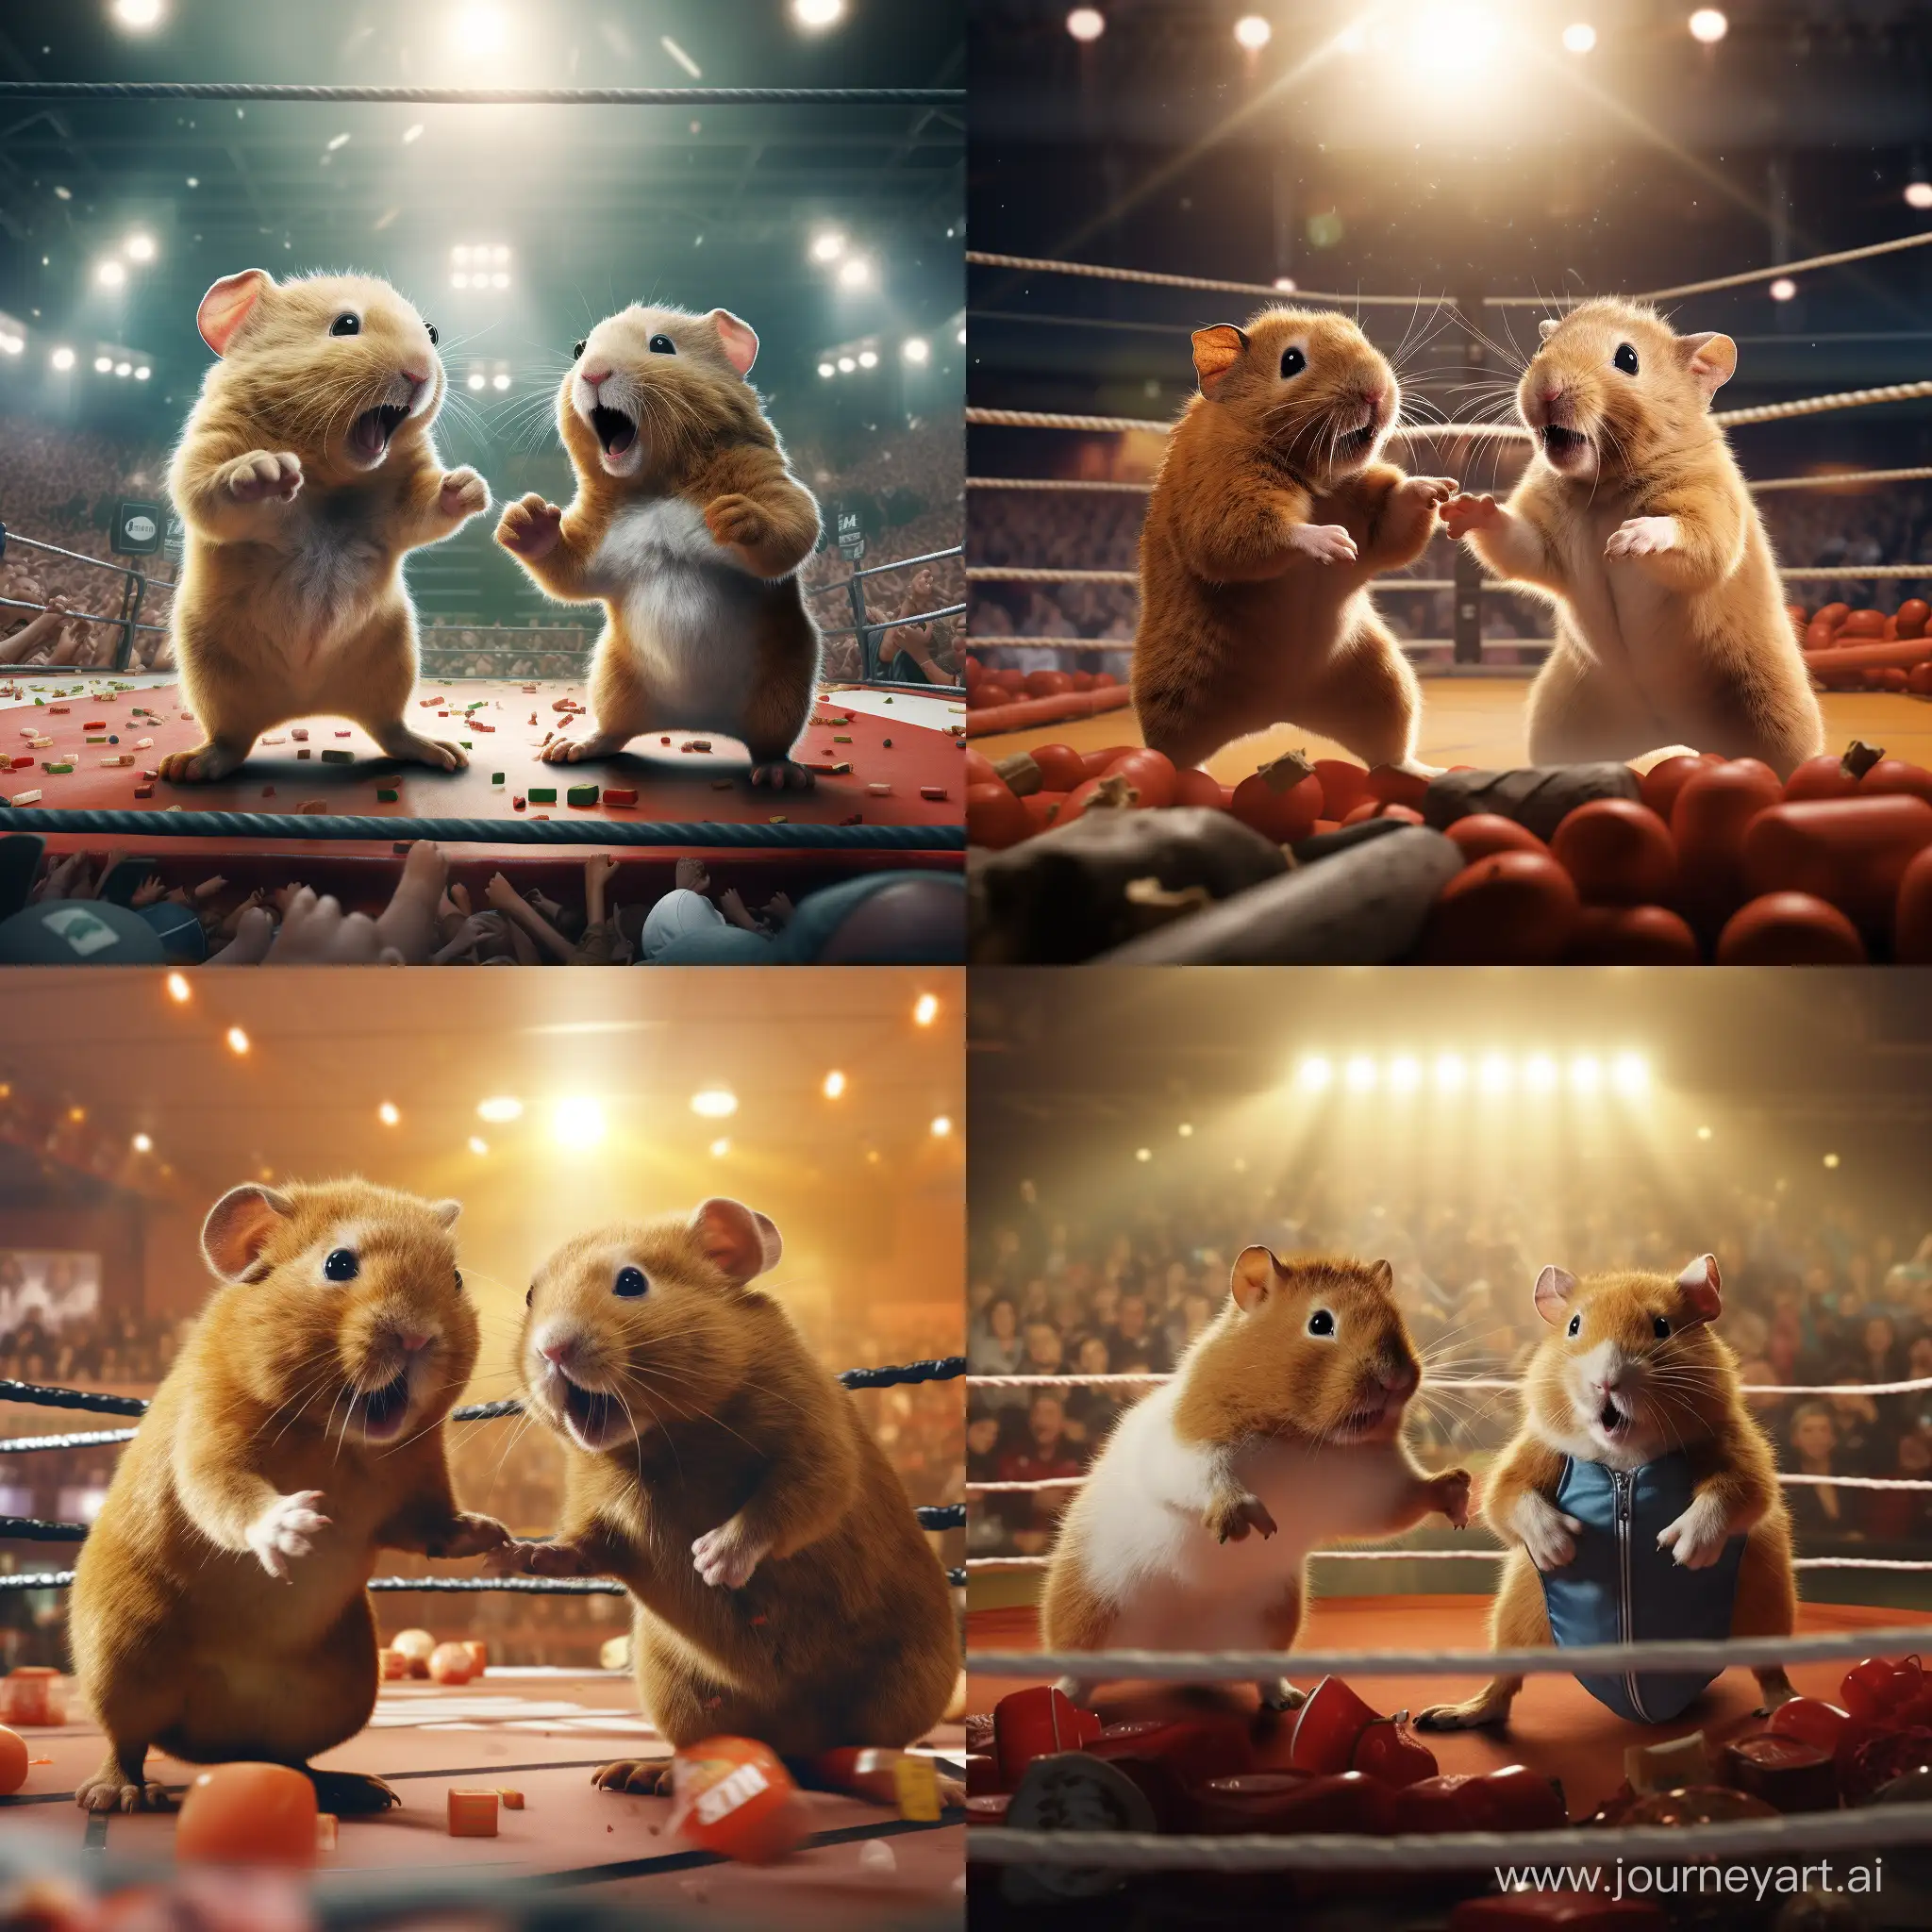 Action shot of 2 cute hamsters fighting each other, during a kickboxing match, in a boxing ring with a crowd of hamsters watching. One hamster is kicking the other hamsters face.